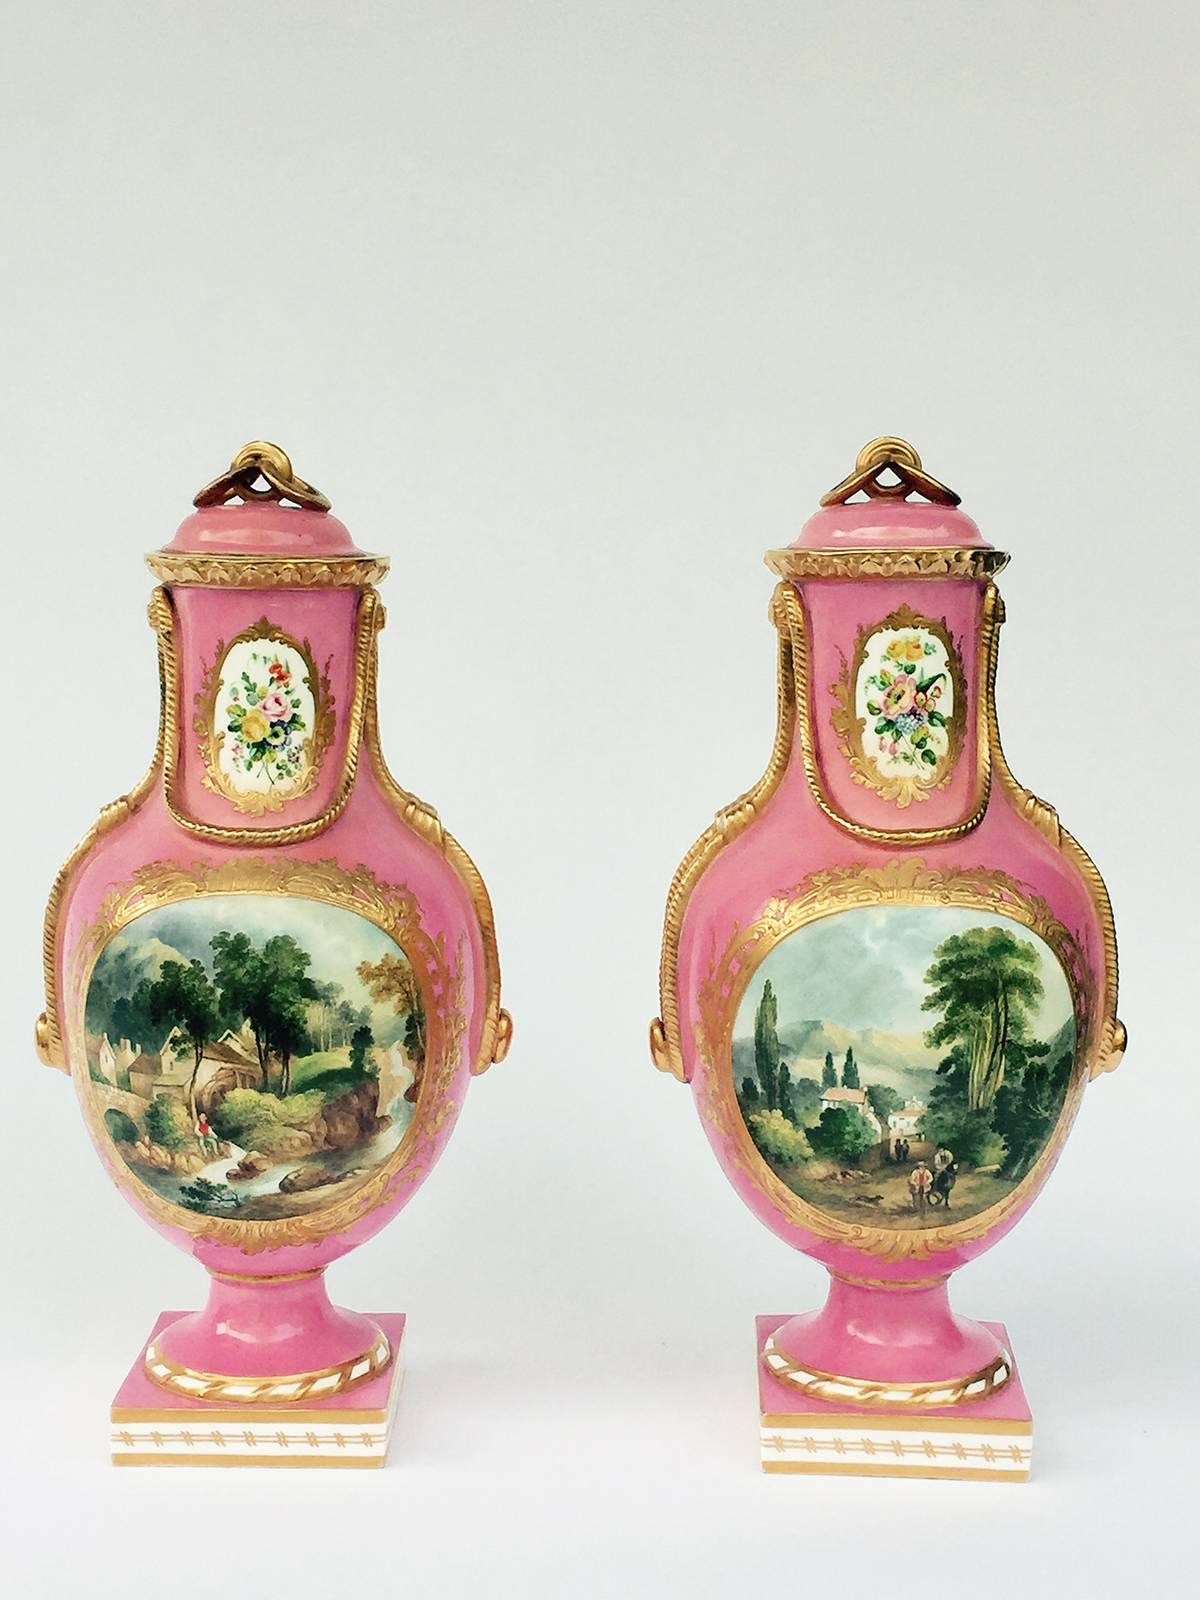 English Coalbrookdale porcelain pair of pink baluster-form vases, made and painted in the Sevres style, each vase molded with faux-bronze 